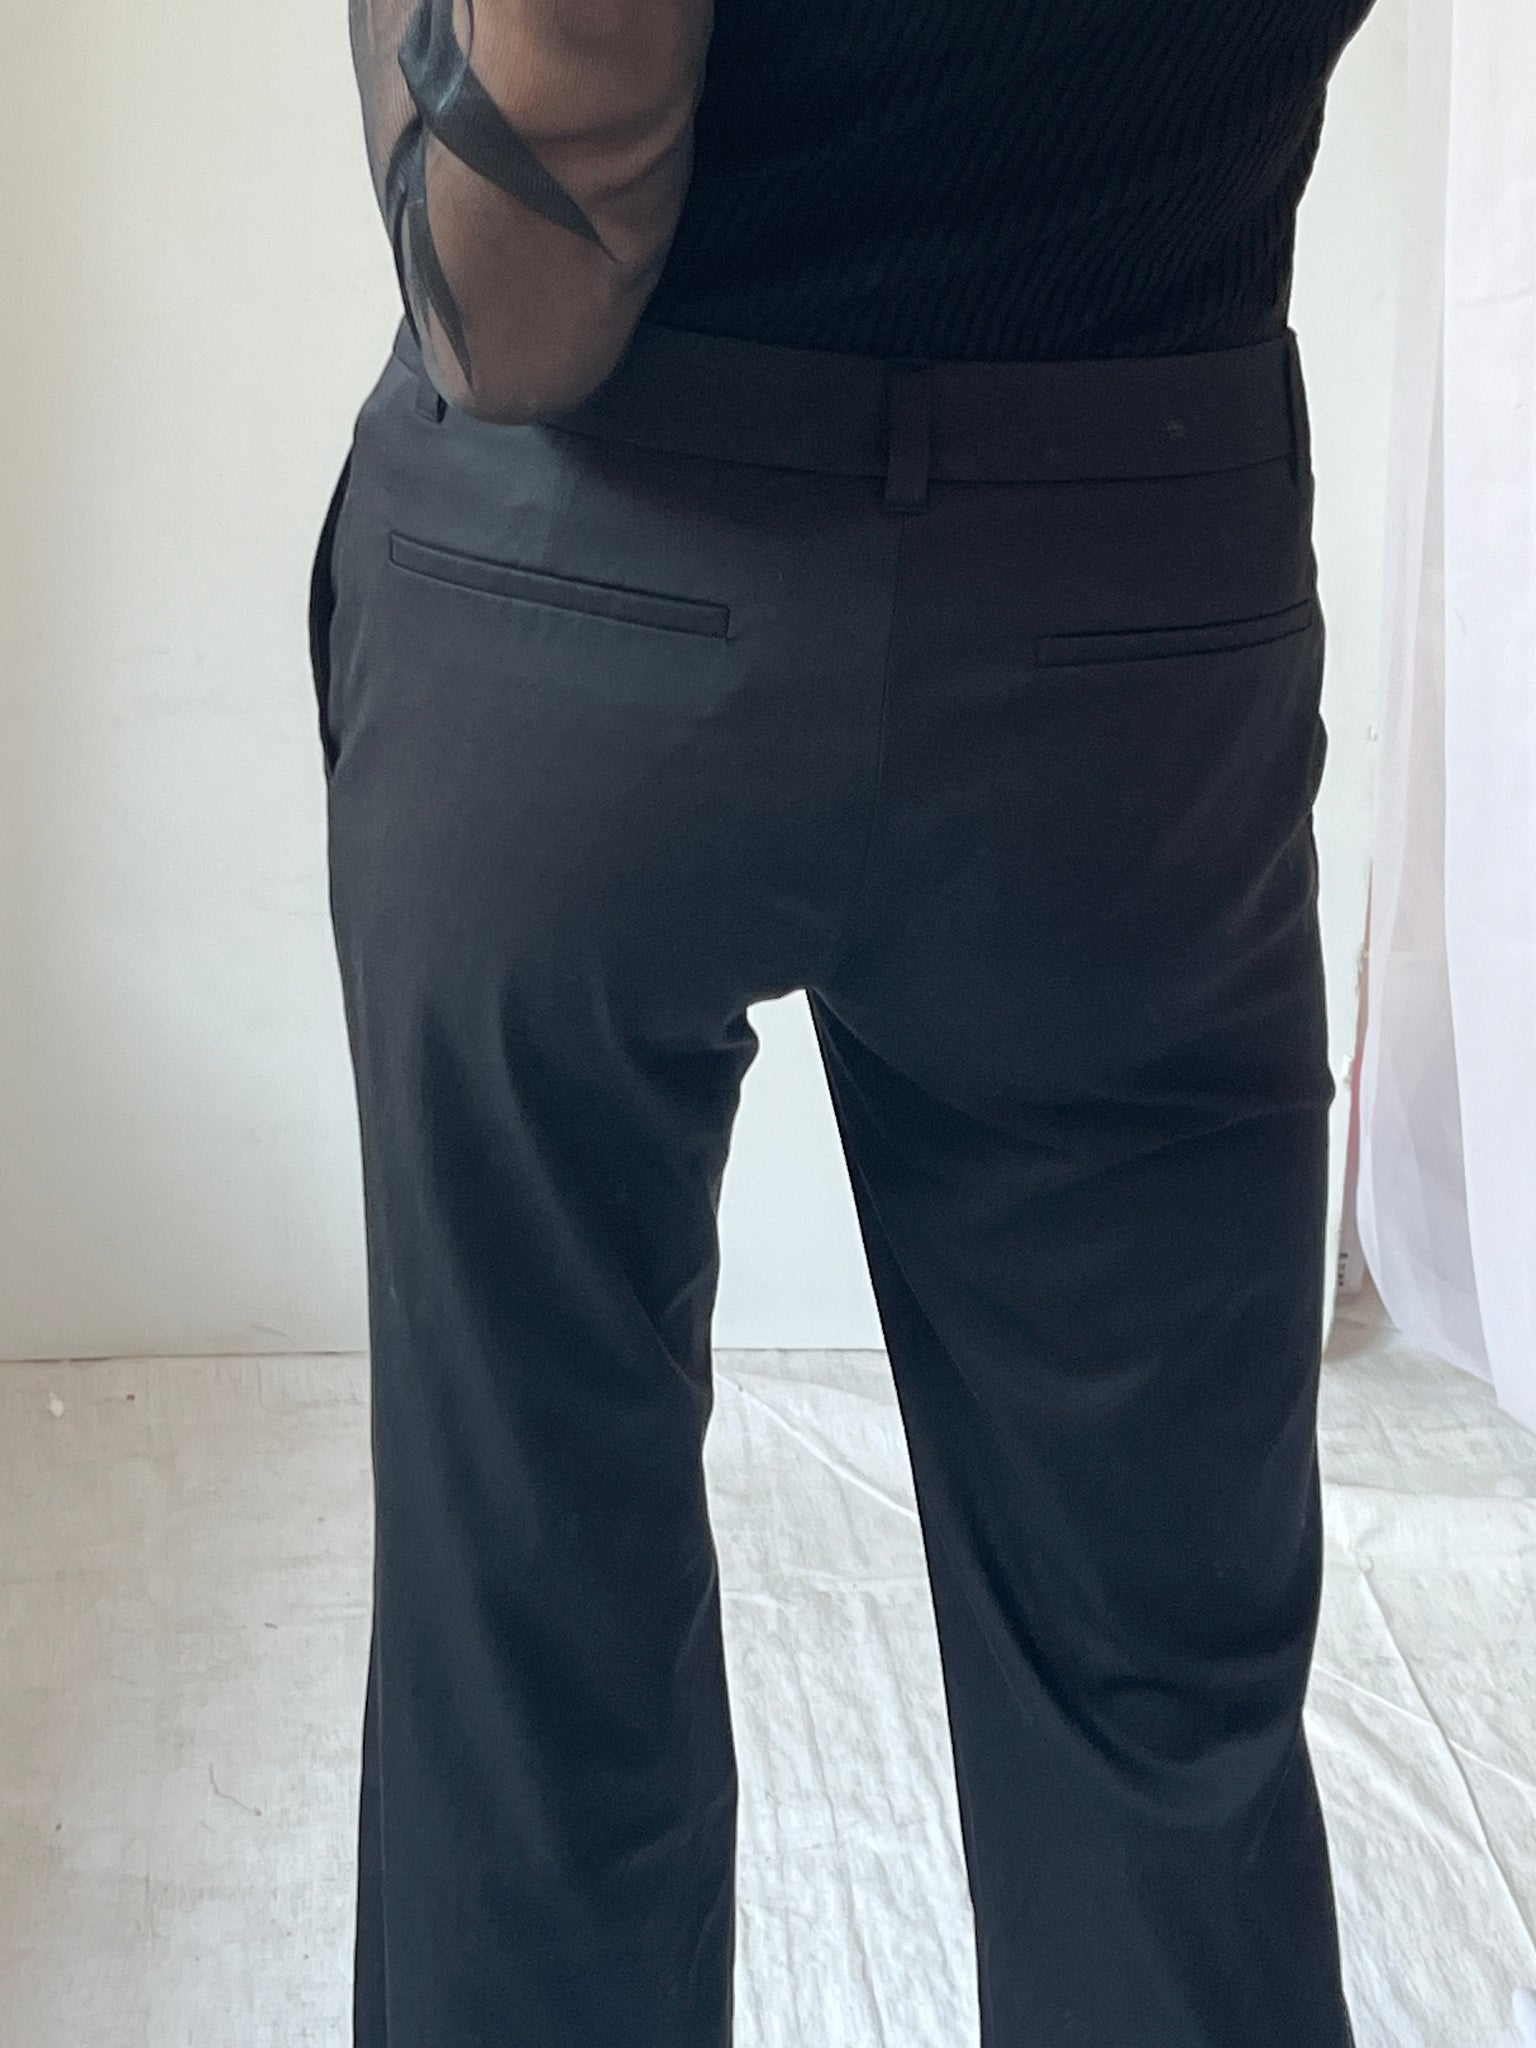 Tom Ford for Gucci bamboo pant